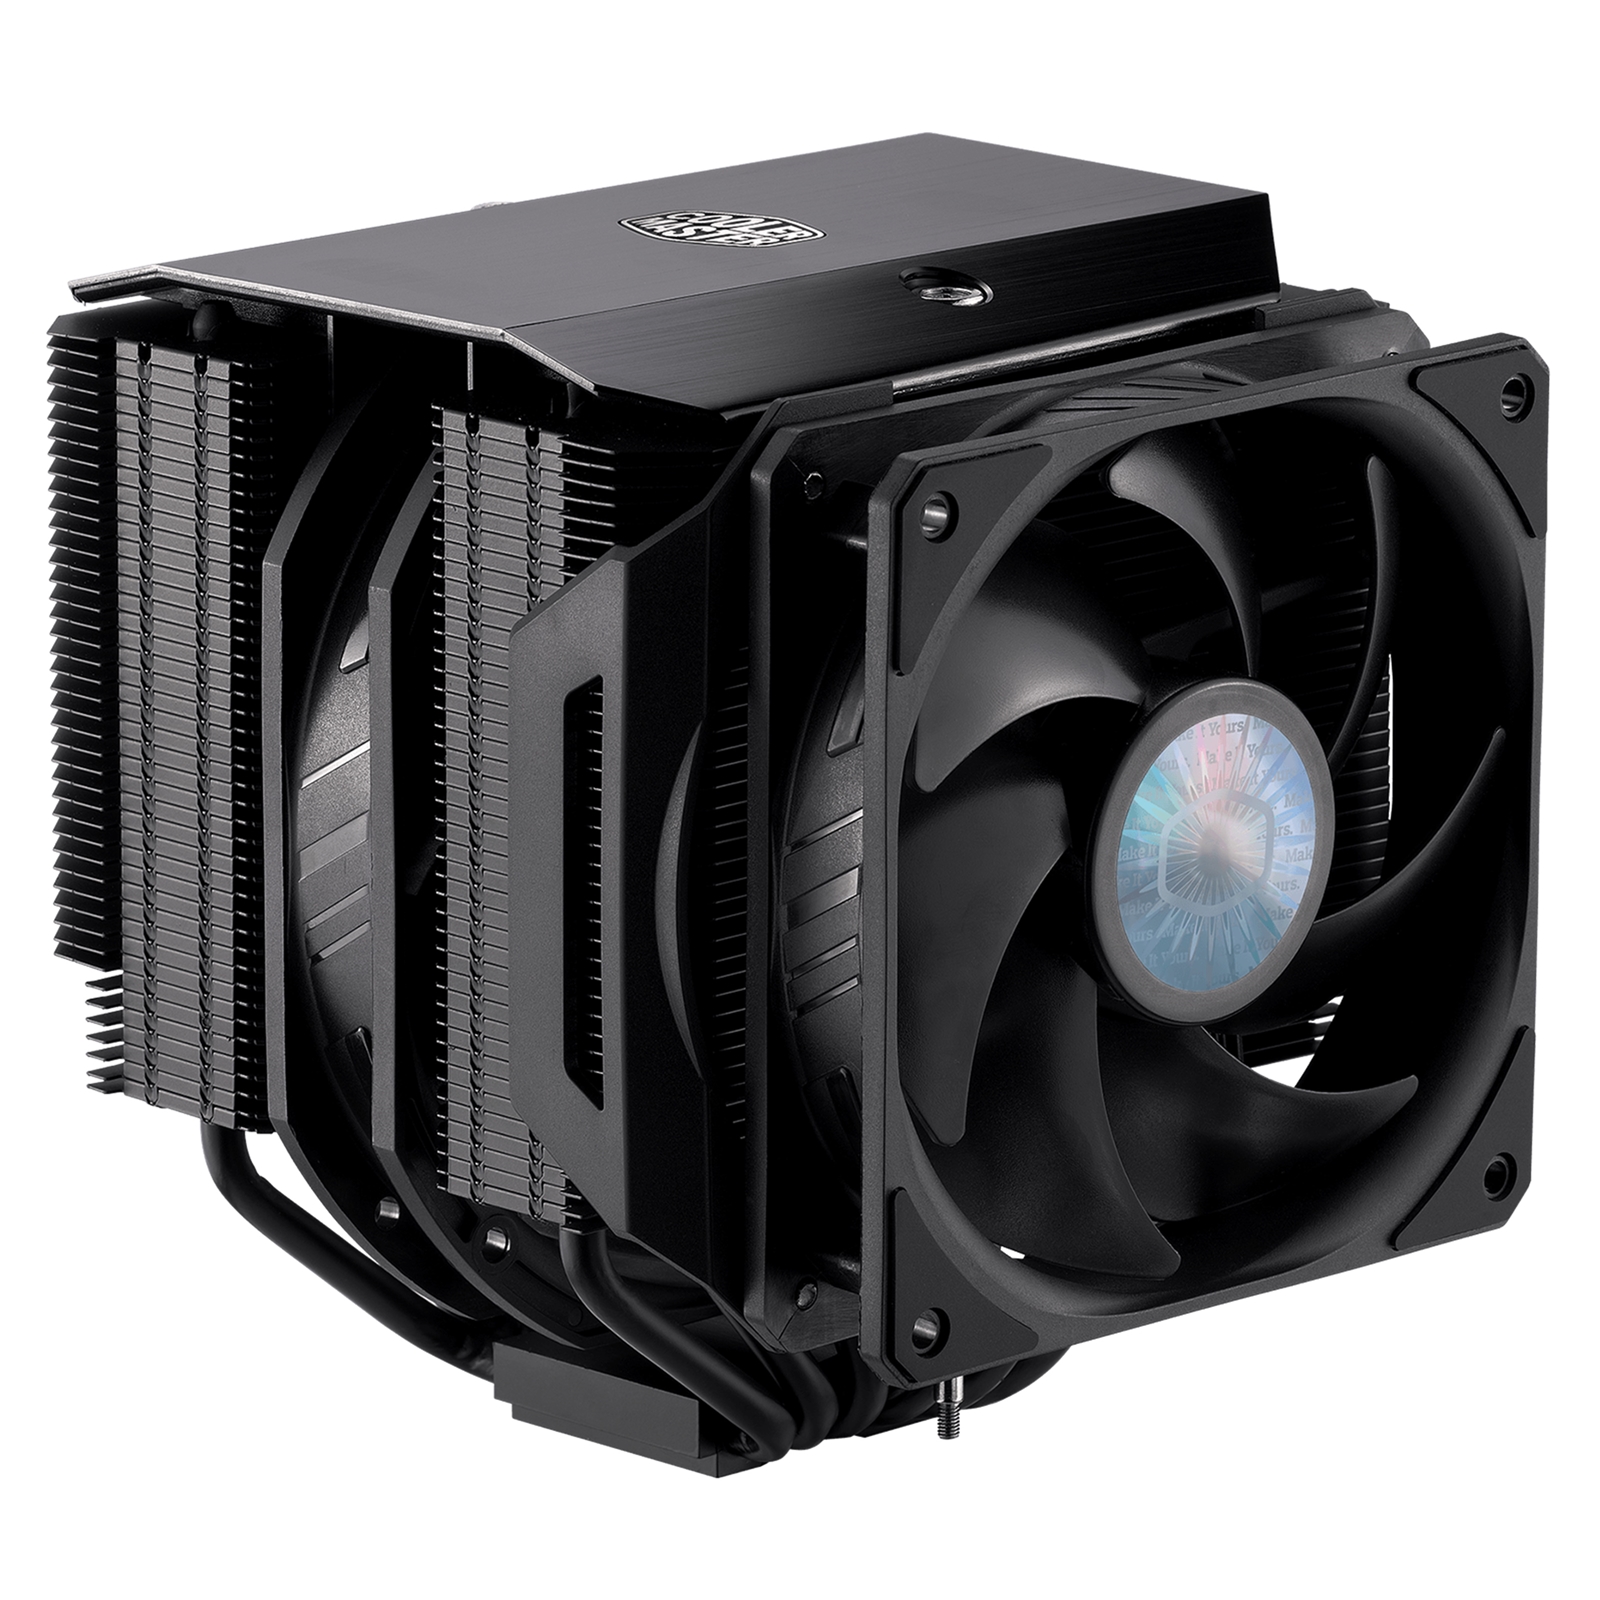 COOLER MASTER MasterAir MA624 Stealth Fan CPU Cooler, Universal Socket, Dual 140mm SickleFlow PWM with Additional 120mm Fan for RAM Clearance, 1400RPM, 6 Heat Pipes with Nickel Plated Base, Premium Aluminum Black Top Cover